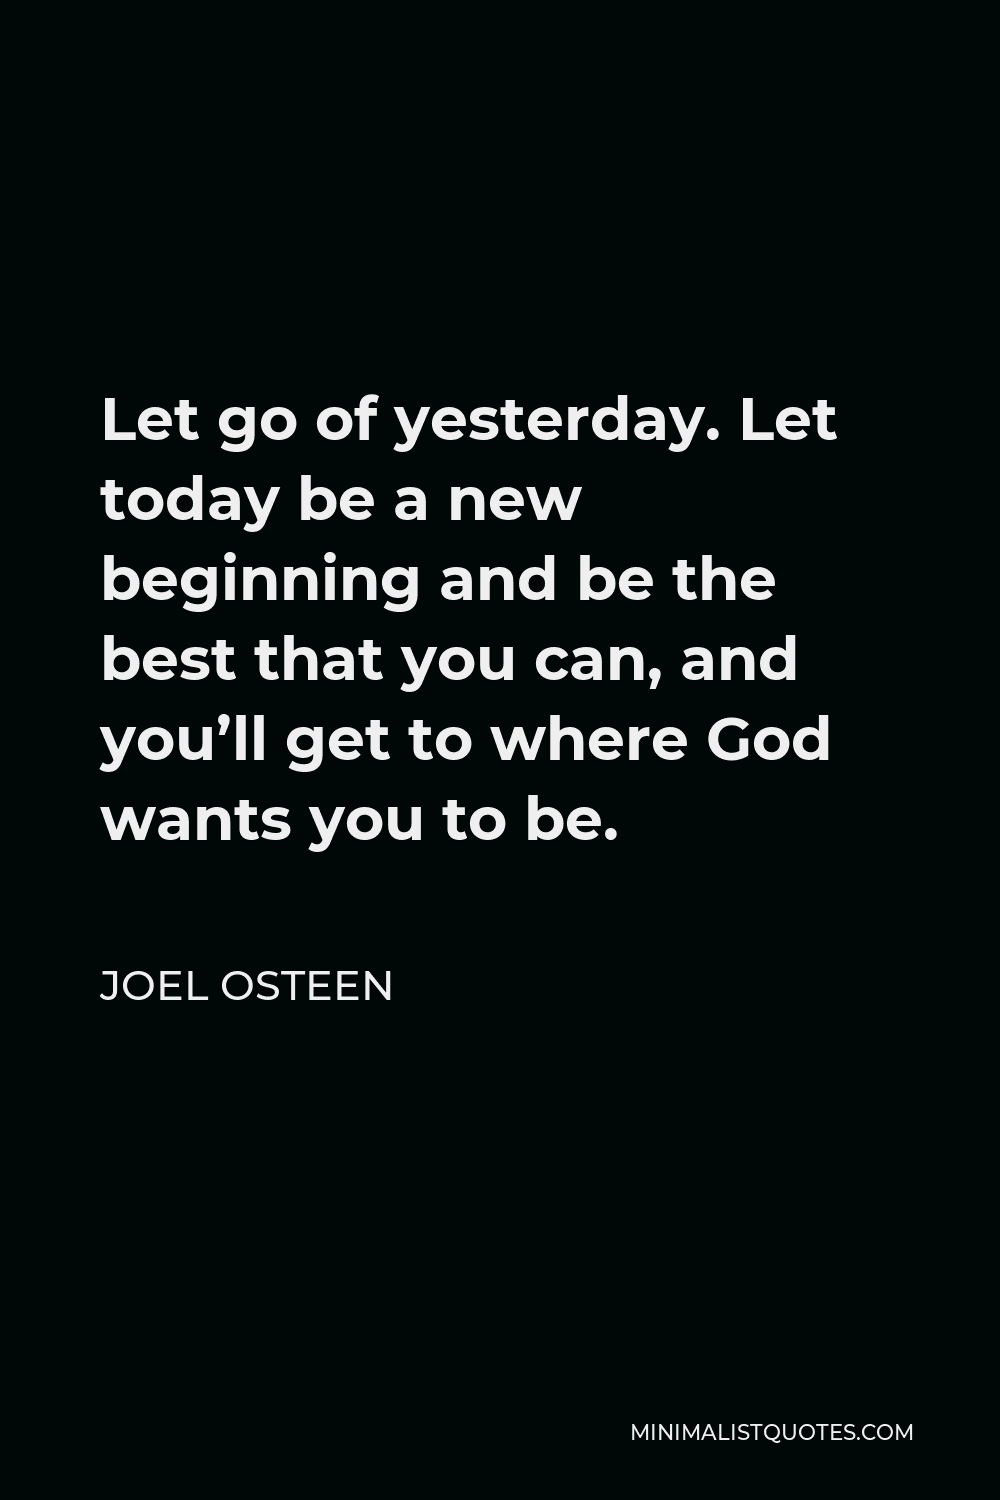 Joel Osteen Quote - Let go of yesterday. Let today be a new beginning and be the best that you can, and you’ll get to where God wants you to be.